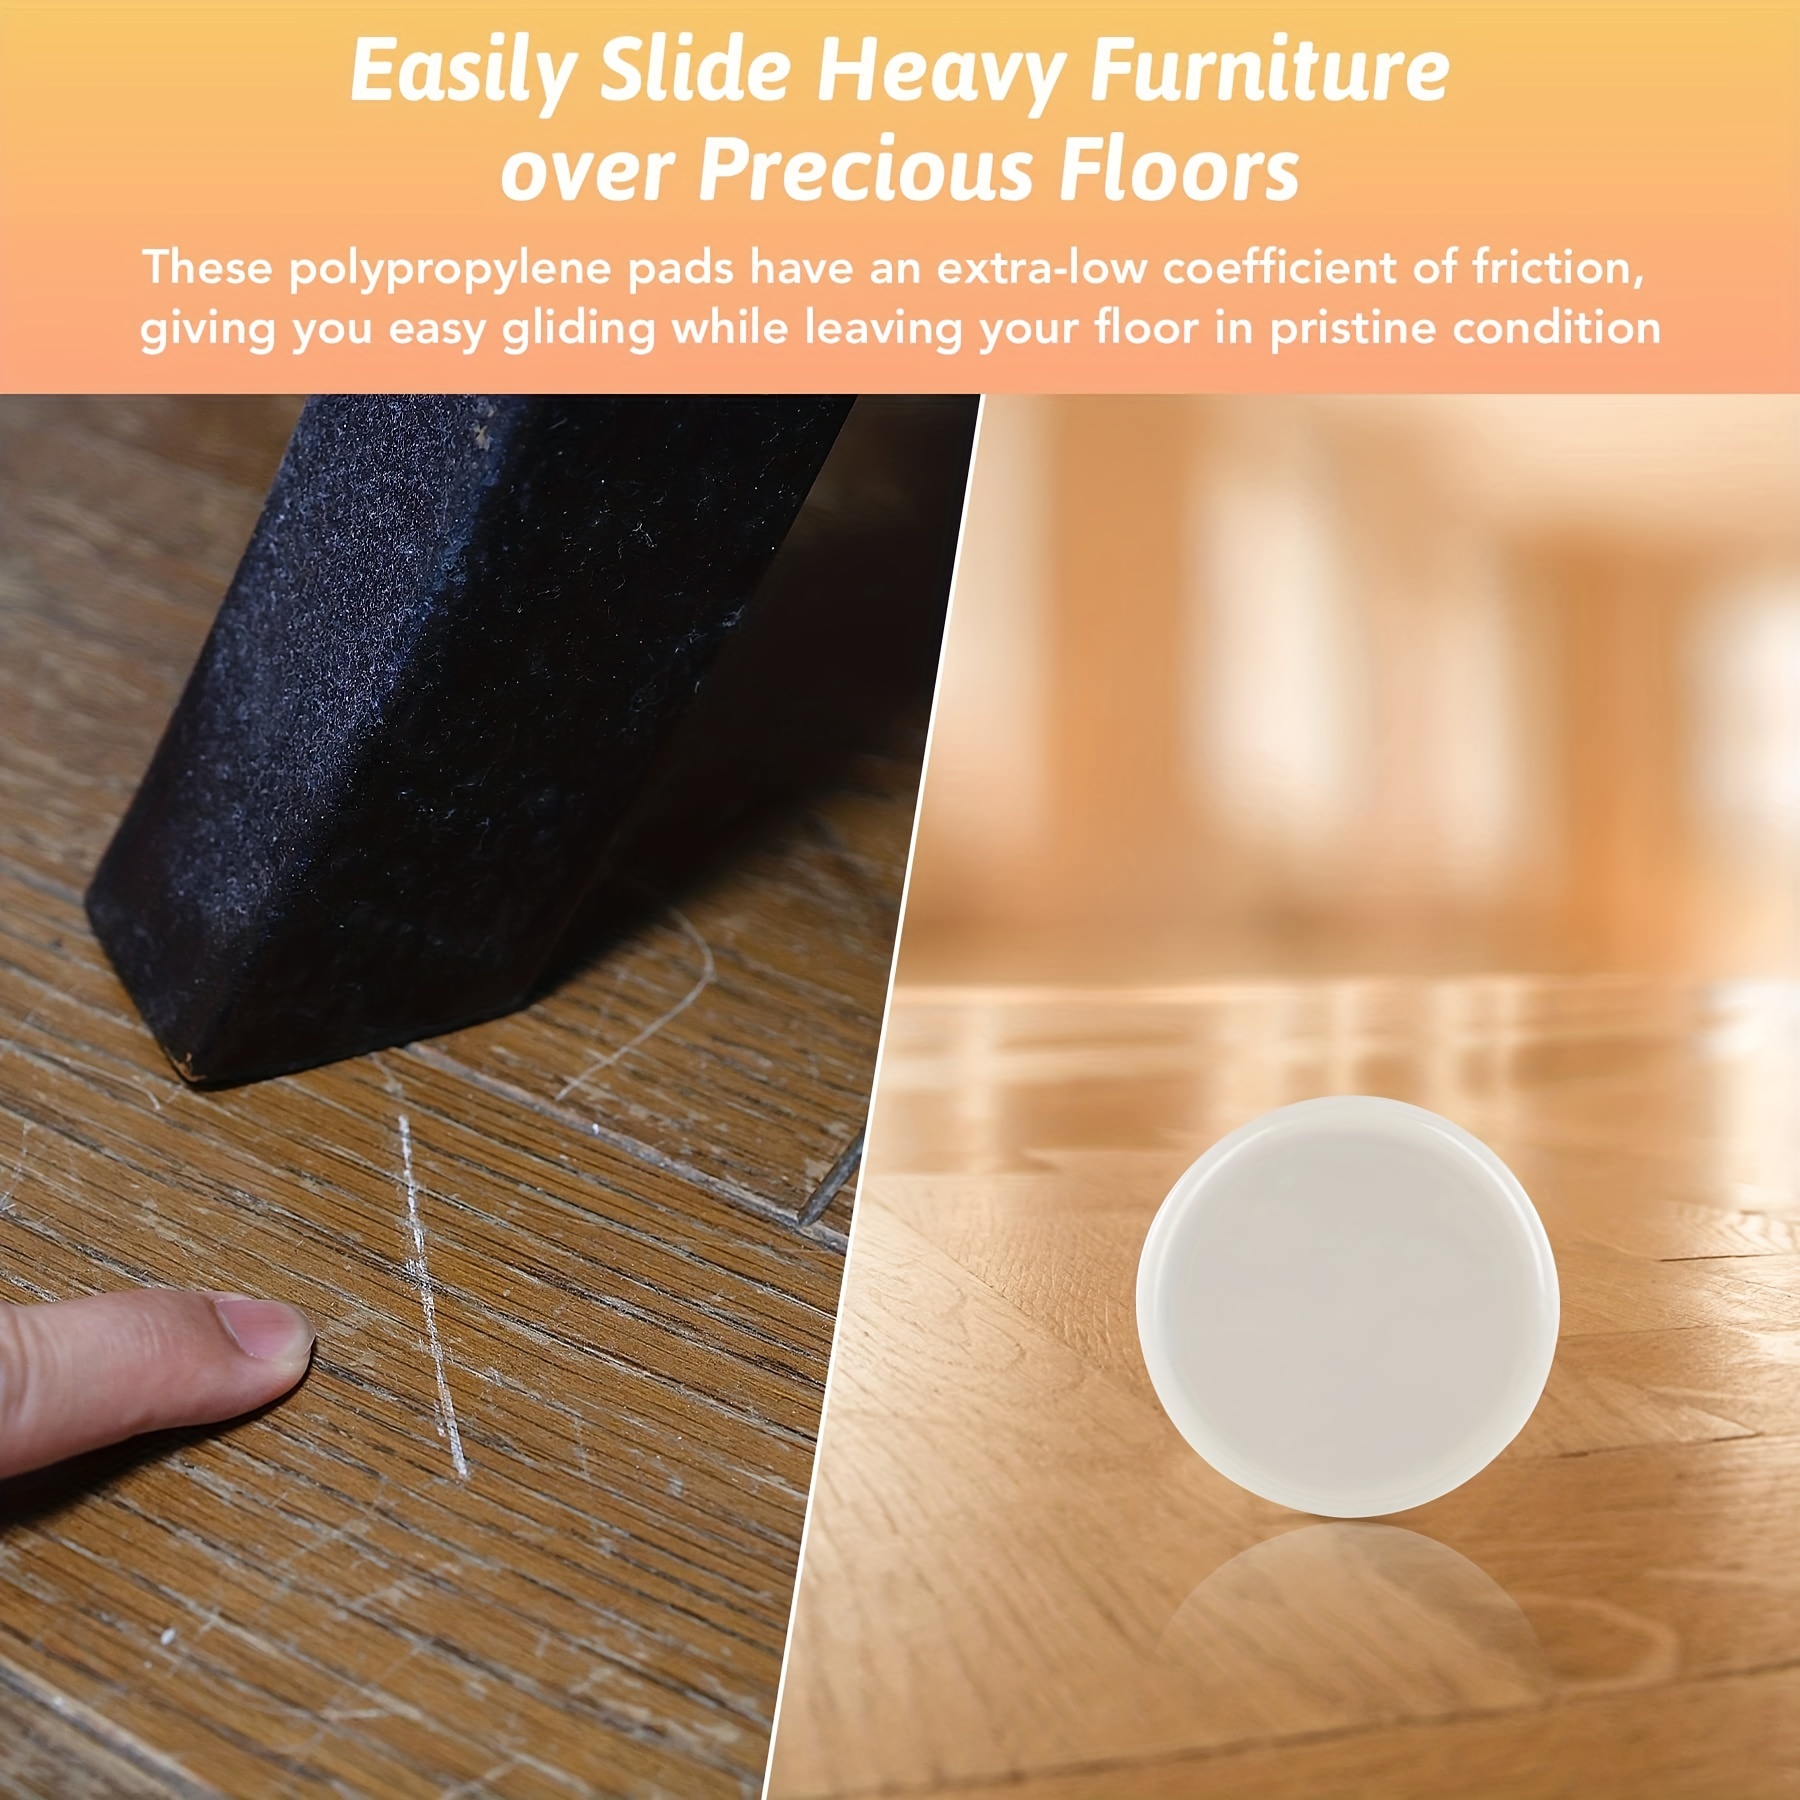 Furniture Pad: Protect Your Furniture While Moving